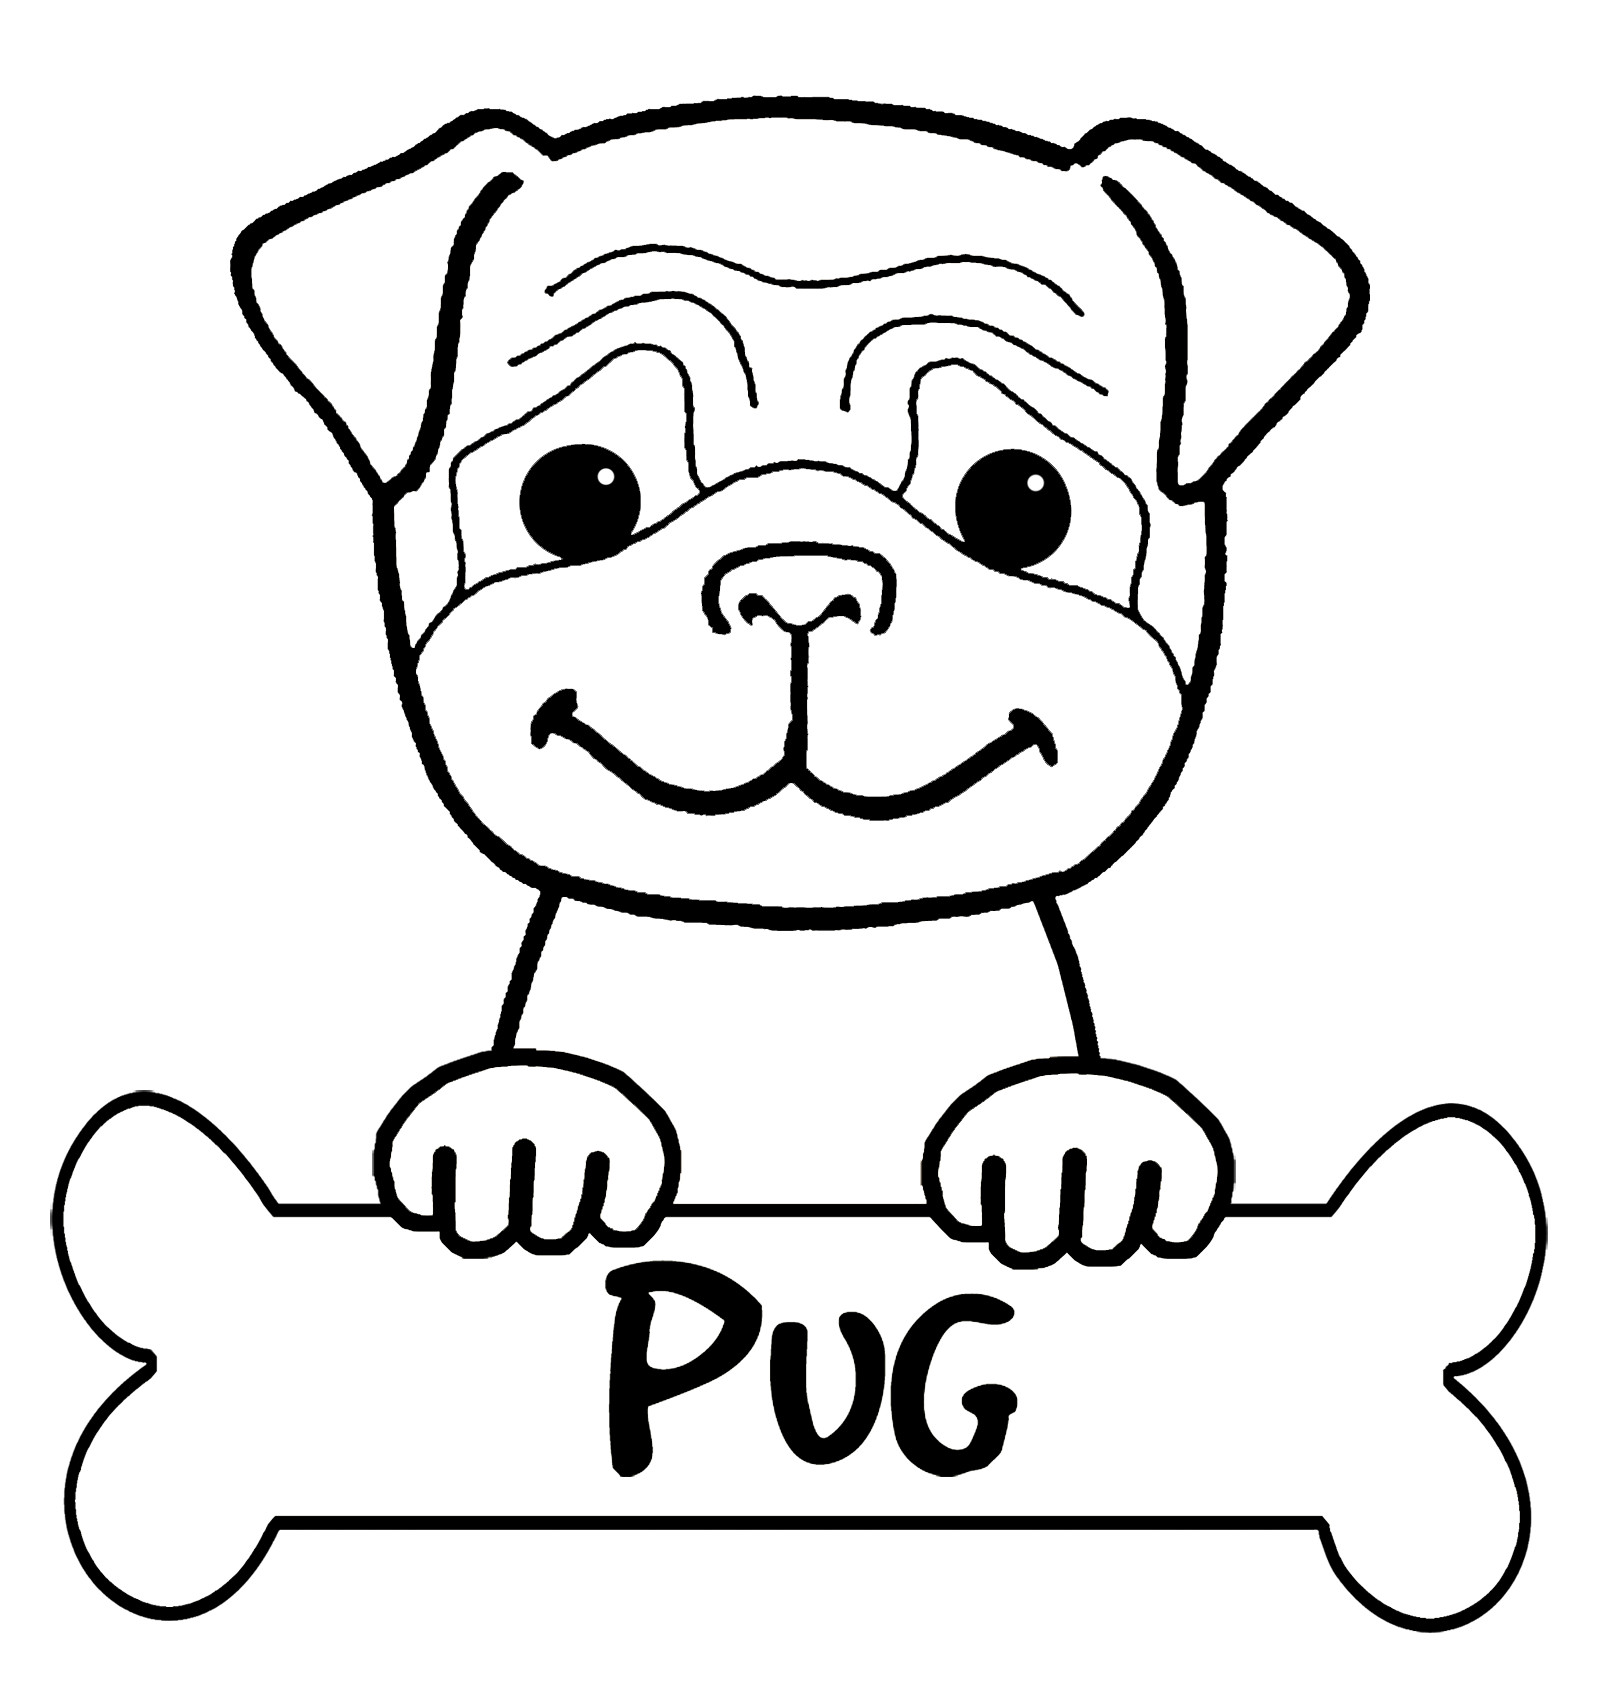 Cute Puppy Coloring Pages For Girls
 Pug Coloring Pages Best Coloring Pages For Kids